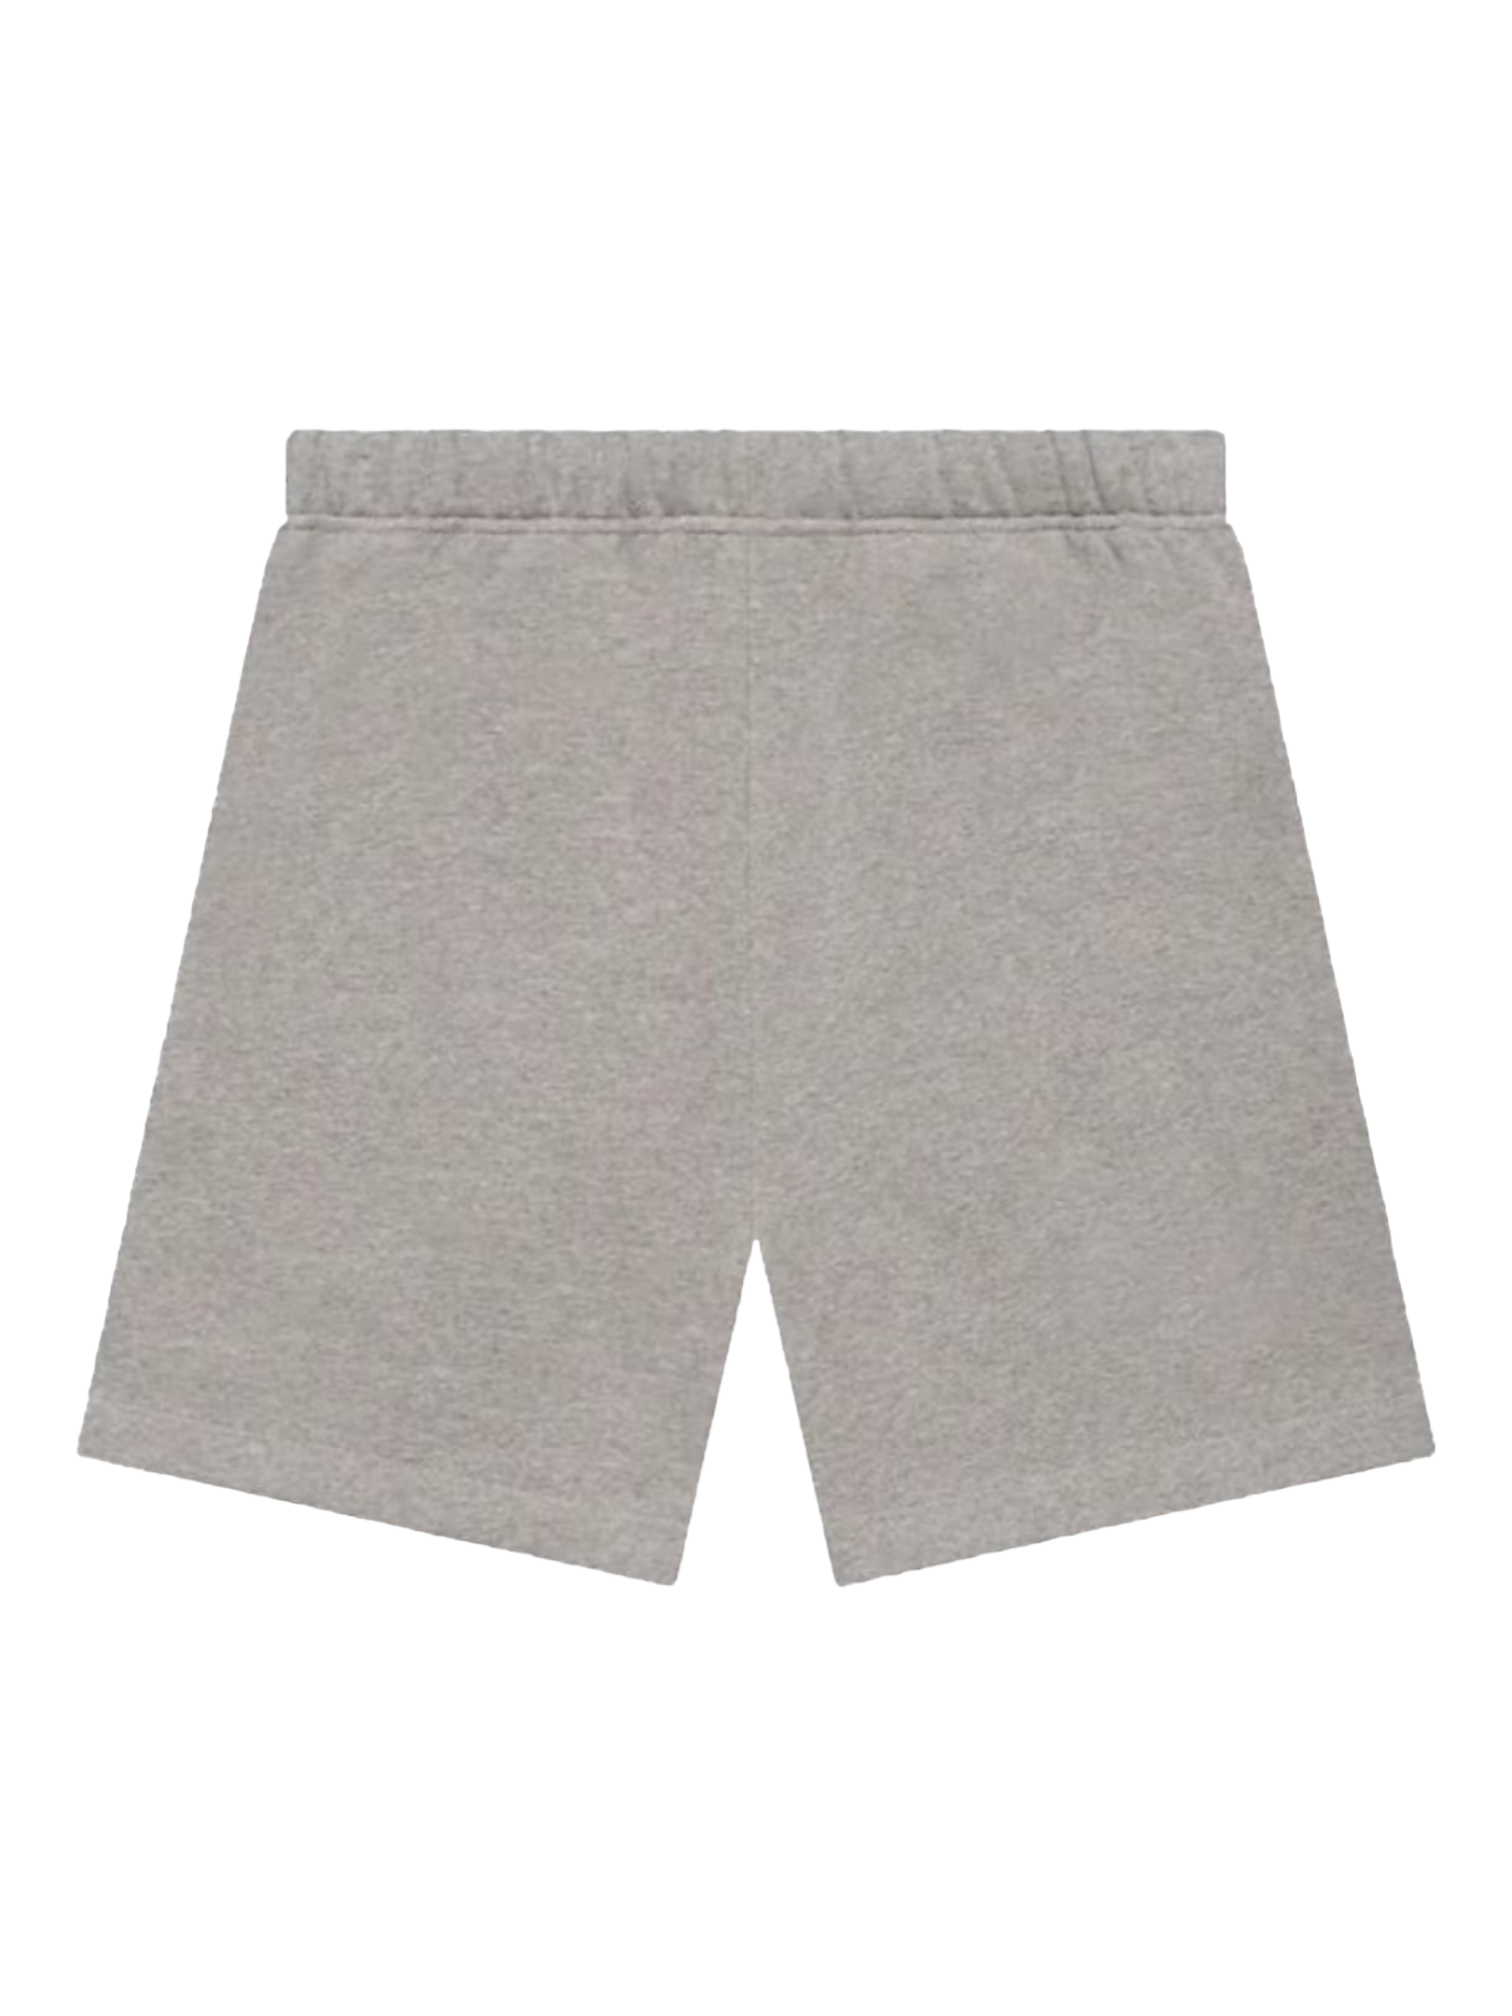 Essentials Fear of God Dark Oatmeal Fleece Shorts FW22 — Genuine Design Luxury Consignment Calgary, Alberta, Canada New and Pre-Owned Clothing, Shoes, Accessories.